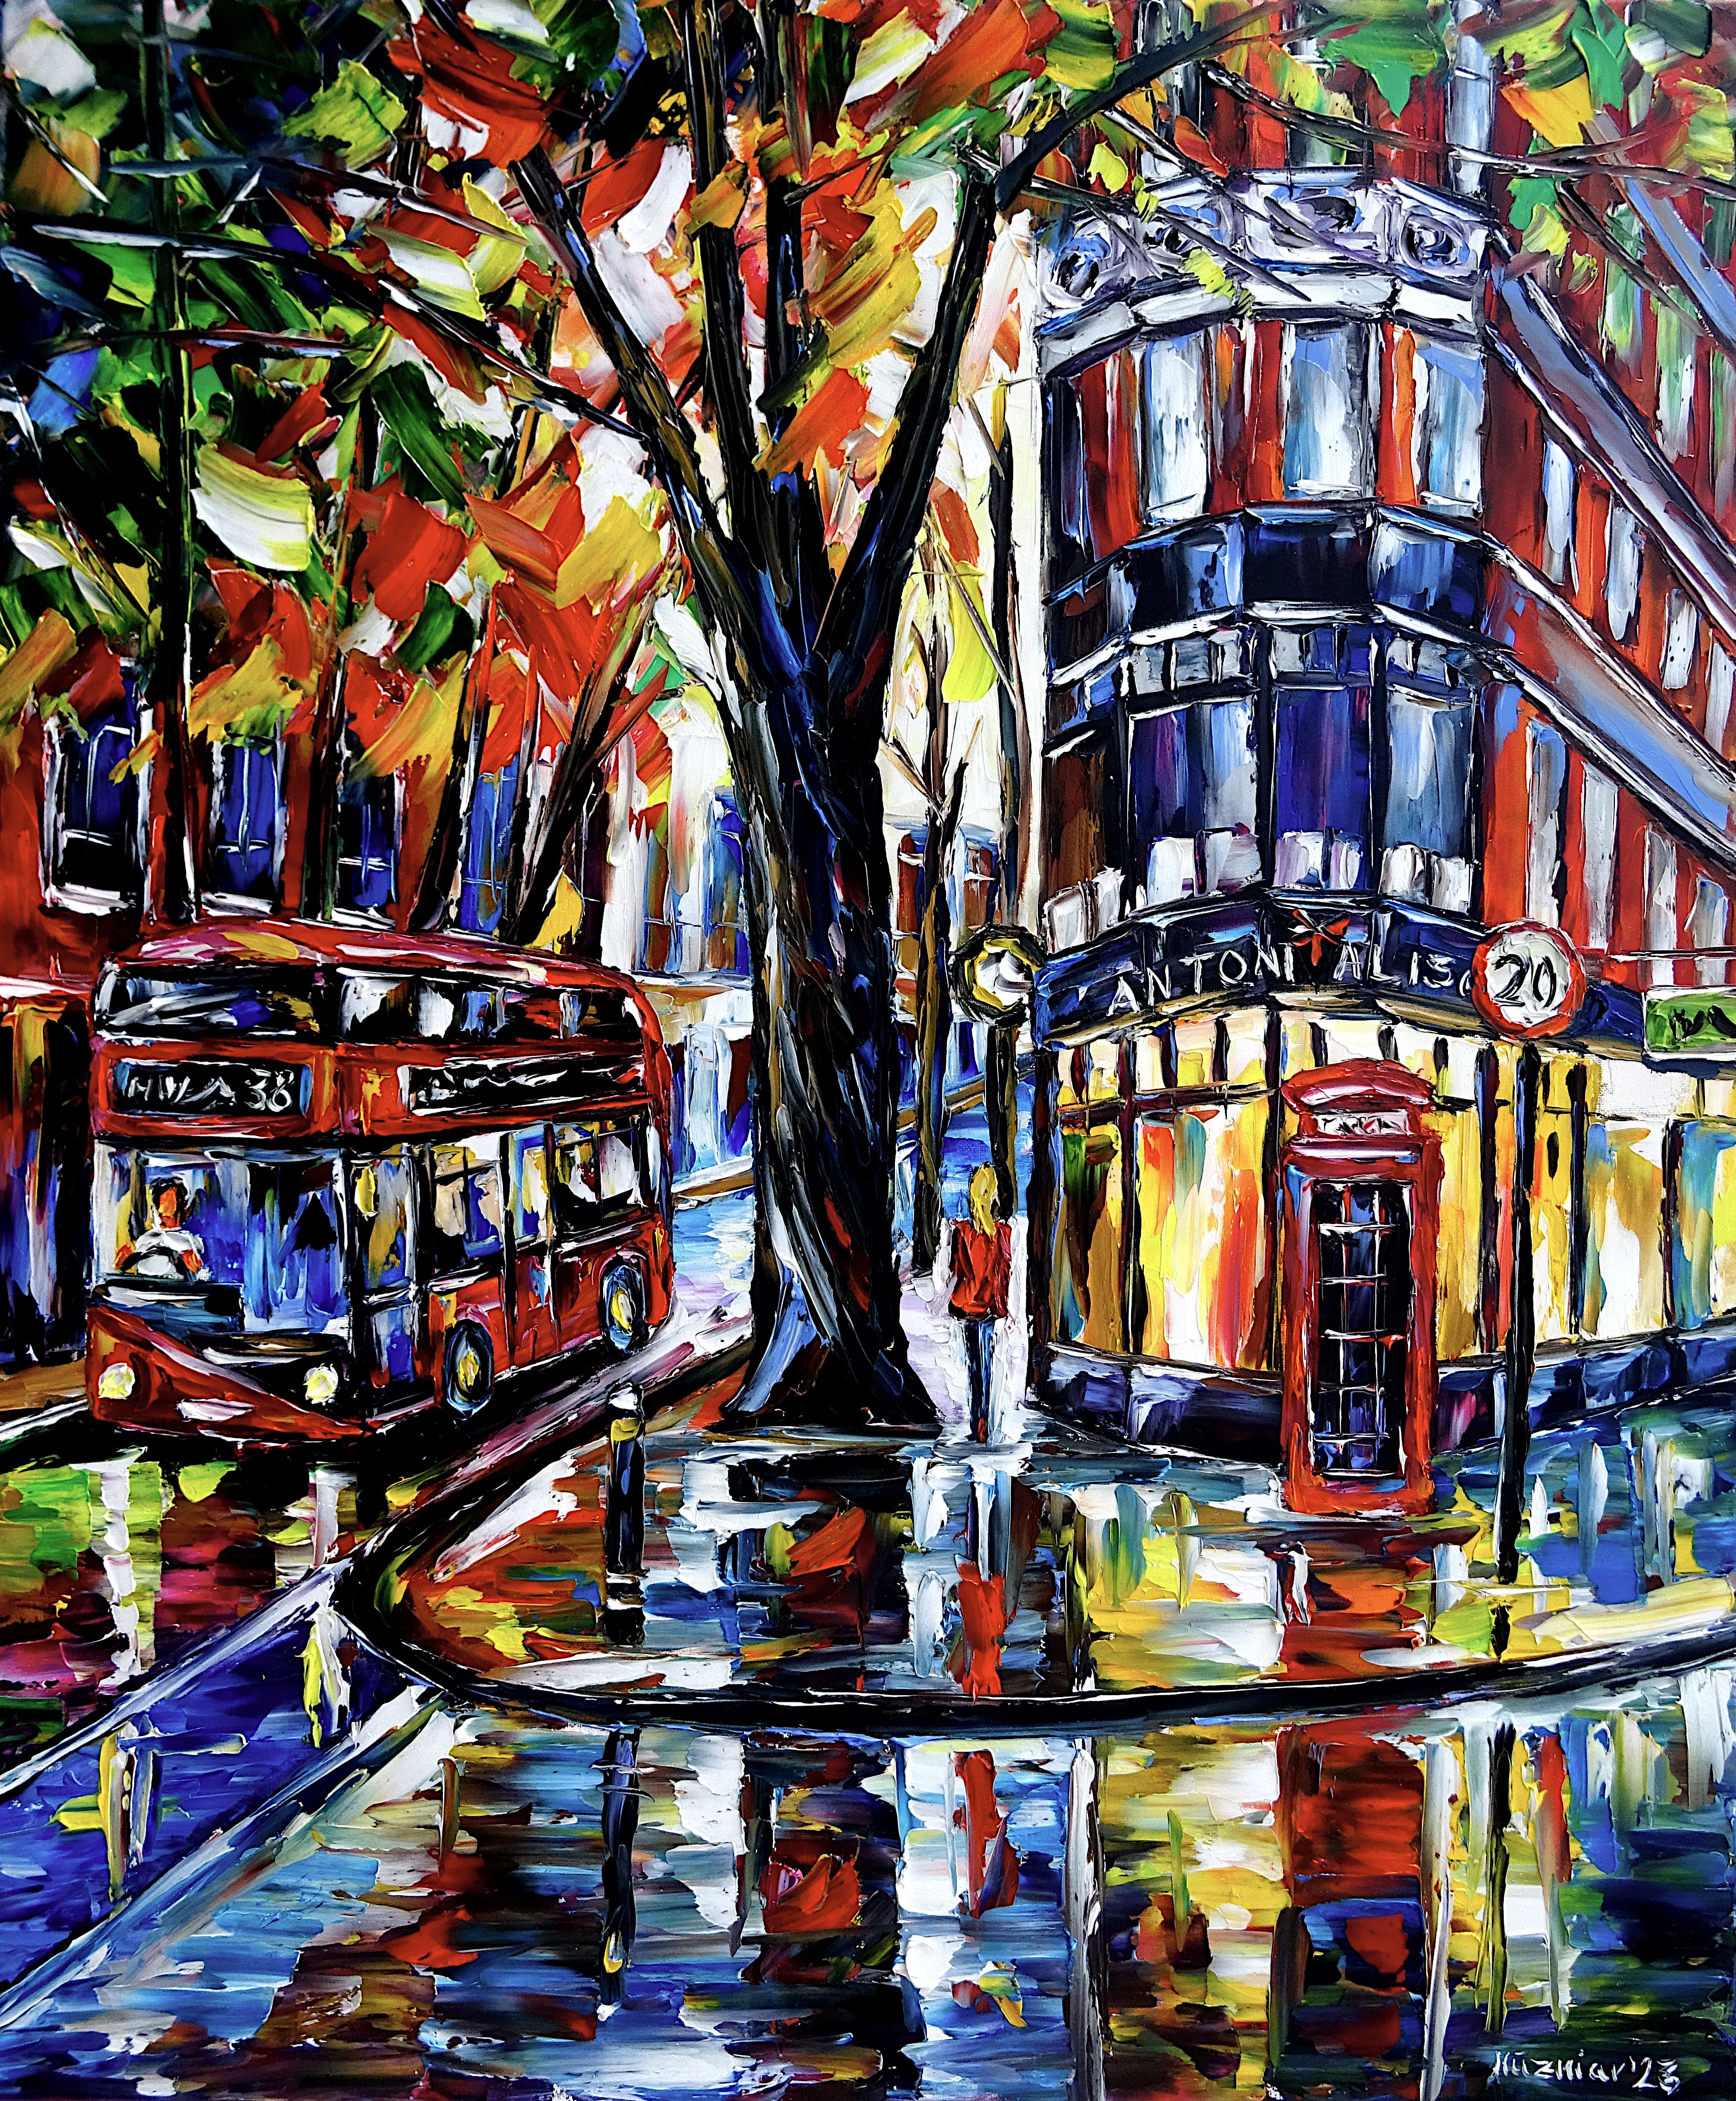 autumn in london,london city scene,london city painting,london bus,double-decker bus,london bus route 38,Piccadilly Circus,london autumn impression,london phone booth,red phone box,city in autumn,lonely woman walking,on the corner,Antoni and Alison,43 Rosebery Ave,London EC1R 4SH,beautiful london,autumn mood,autumn trees,london love,london lovers,i love london,london colorful,london abstract,london's beauty,london boutique,autumn colors,lively autumn,colorful autumn,autumn beauty,autumn painting,colorful picture,colorful painting,palette knife oil painting,modern art,impressionism,abstract painting,lively colors,colorful painting,bright colors,light reflections,impasto painting,figurative